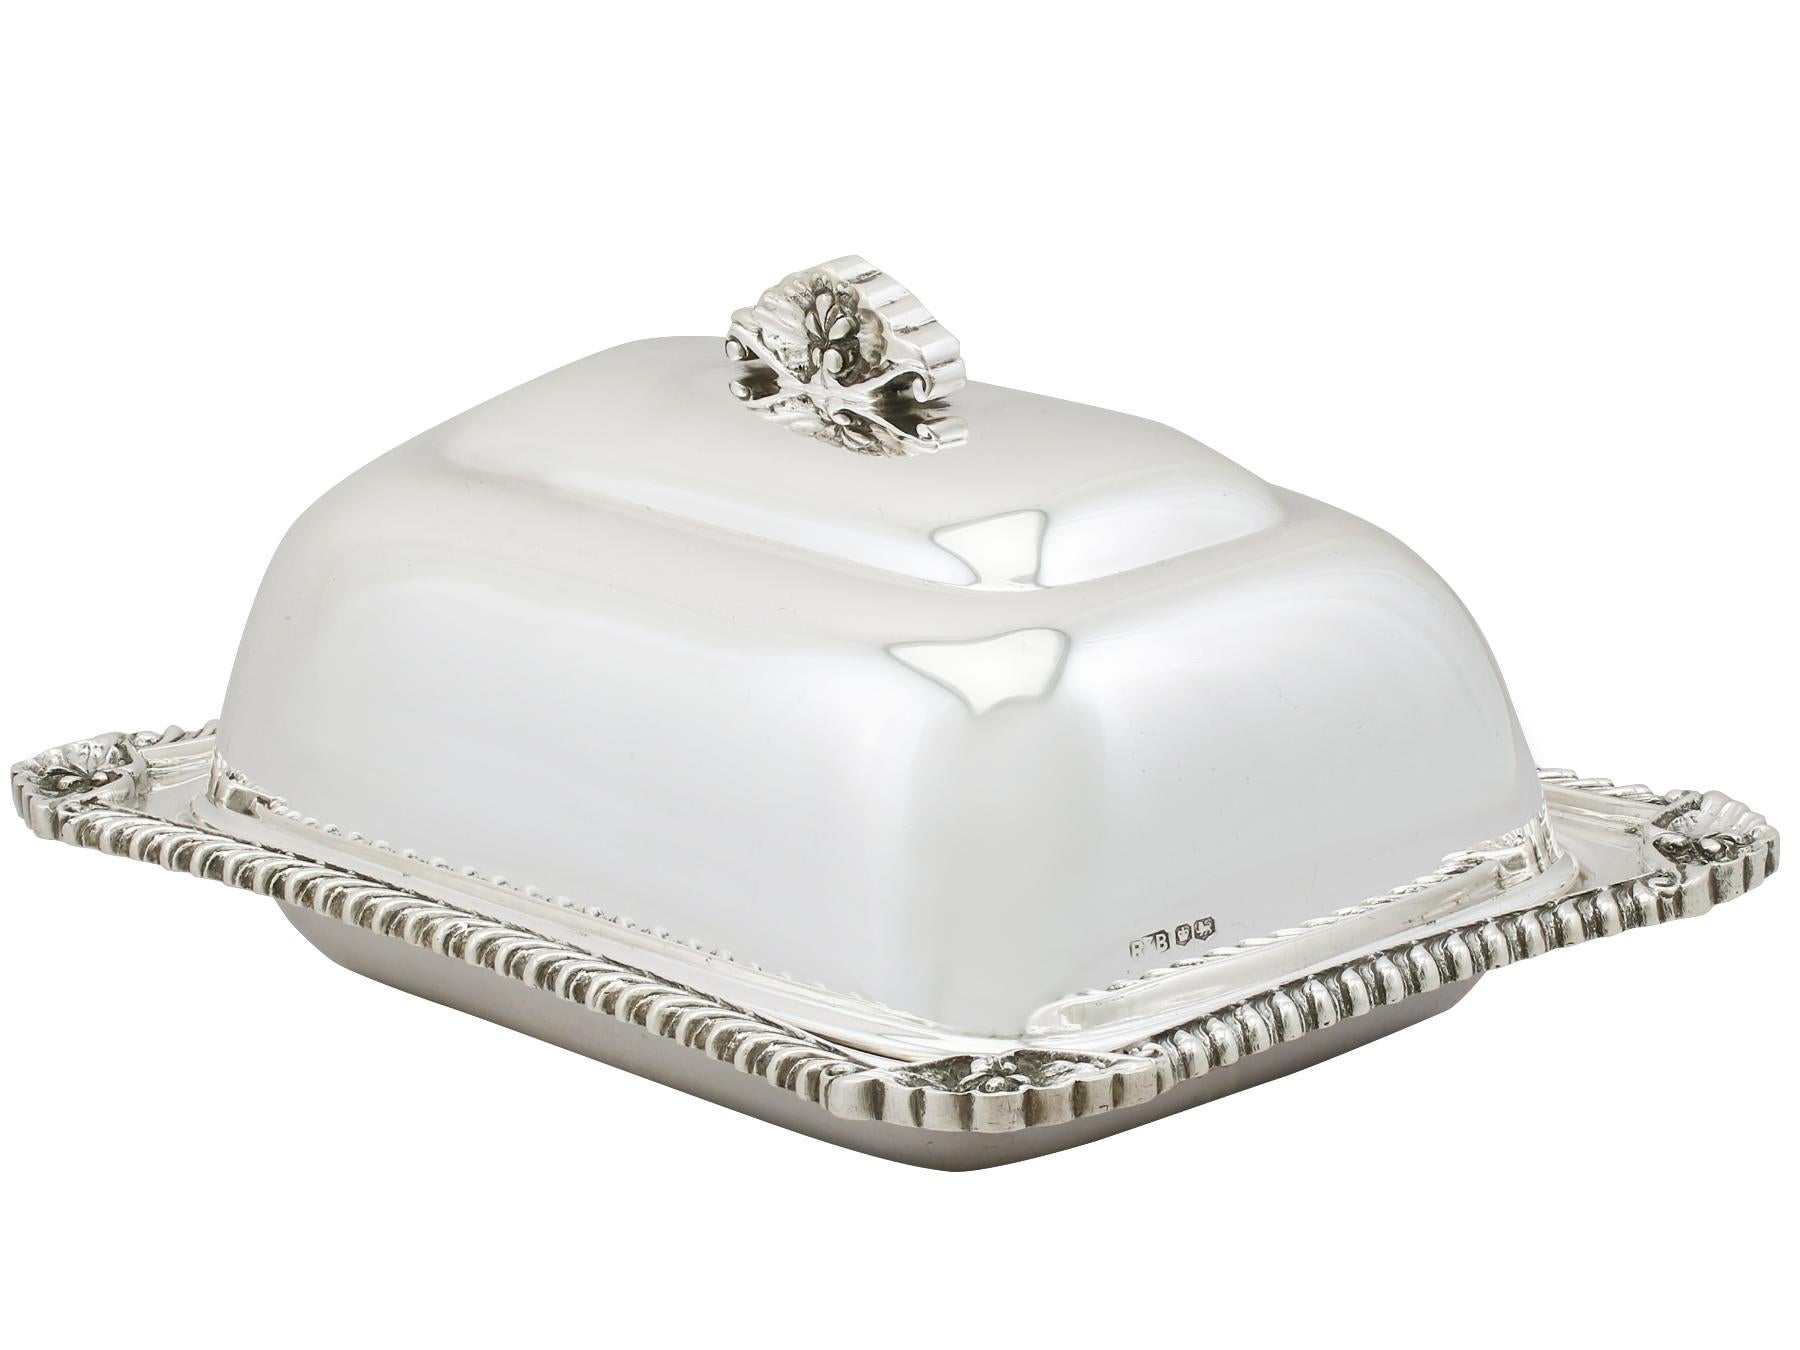 1960s butter dish